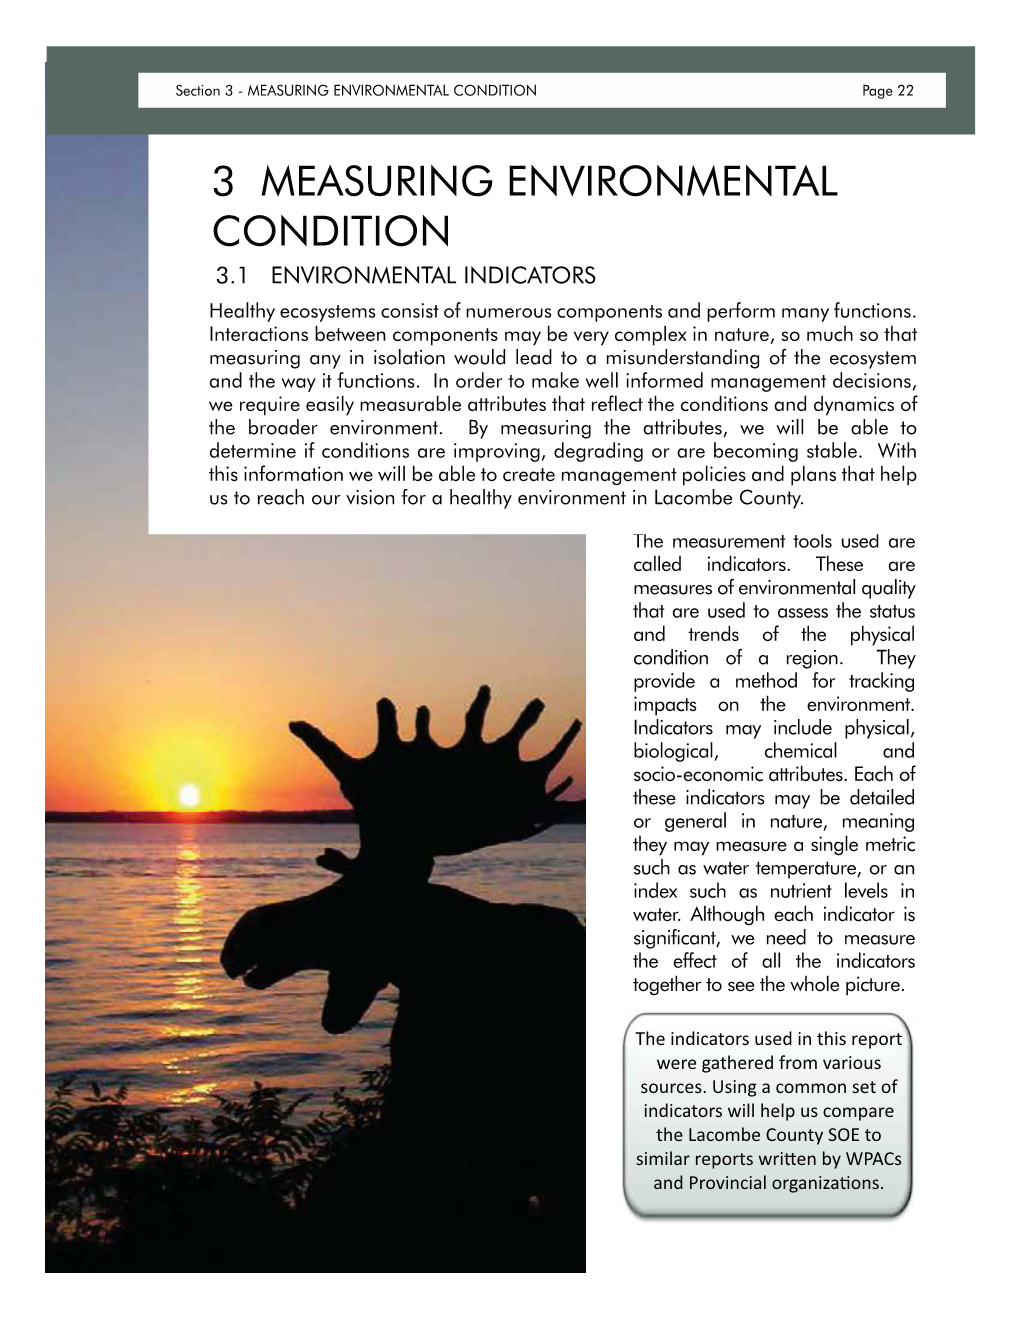 3 MEASURING ENVIRONMENTAL CONDITION 3.1 ENVIRONMENTAL INDICATORS Healthy Ecosystems Consist of Numerous Components and Perform Many Functions